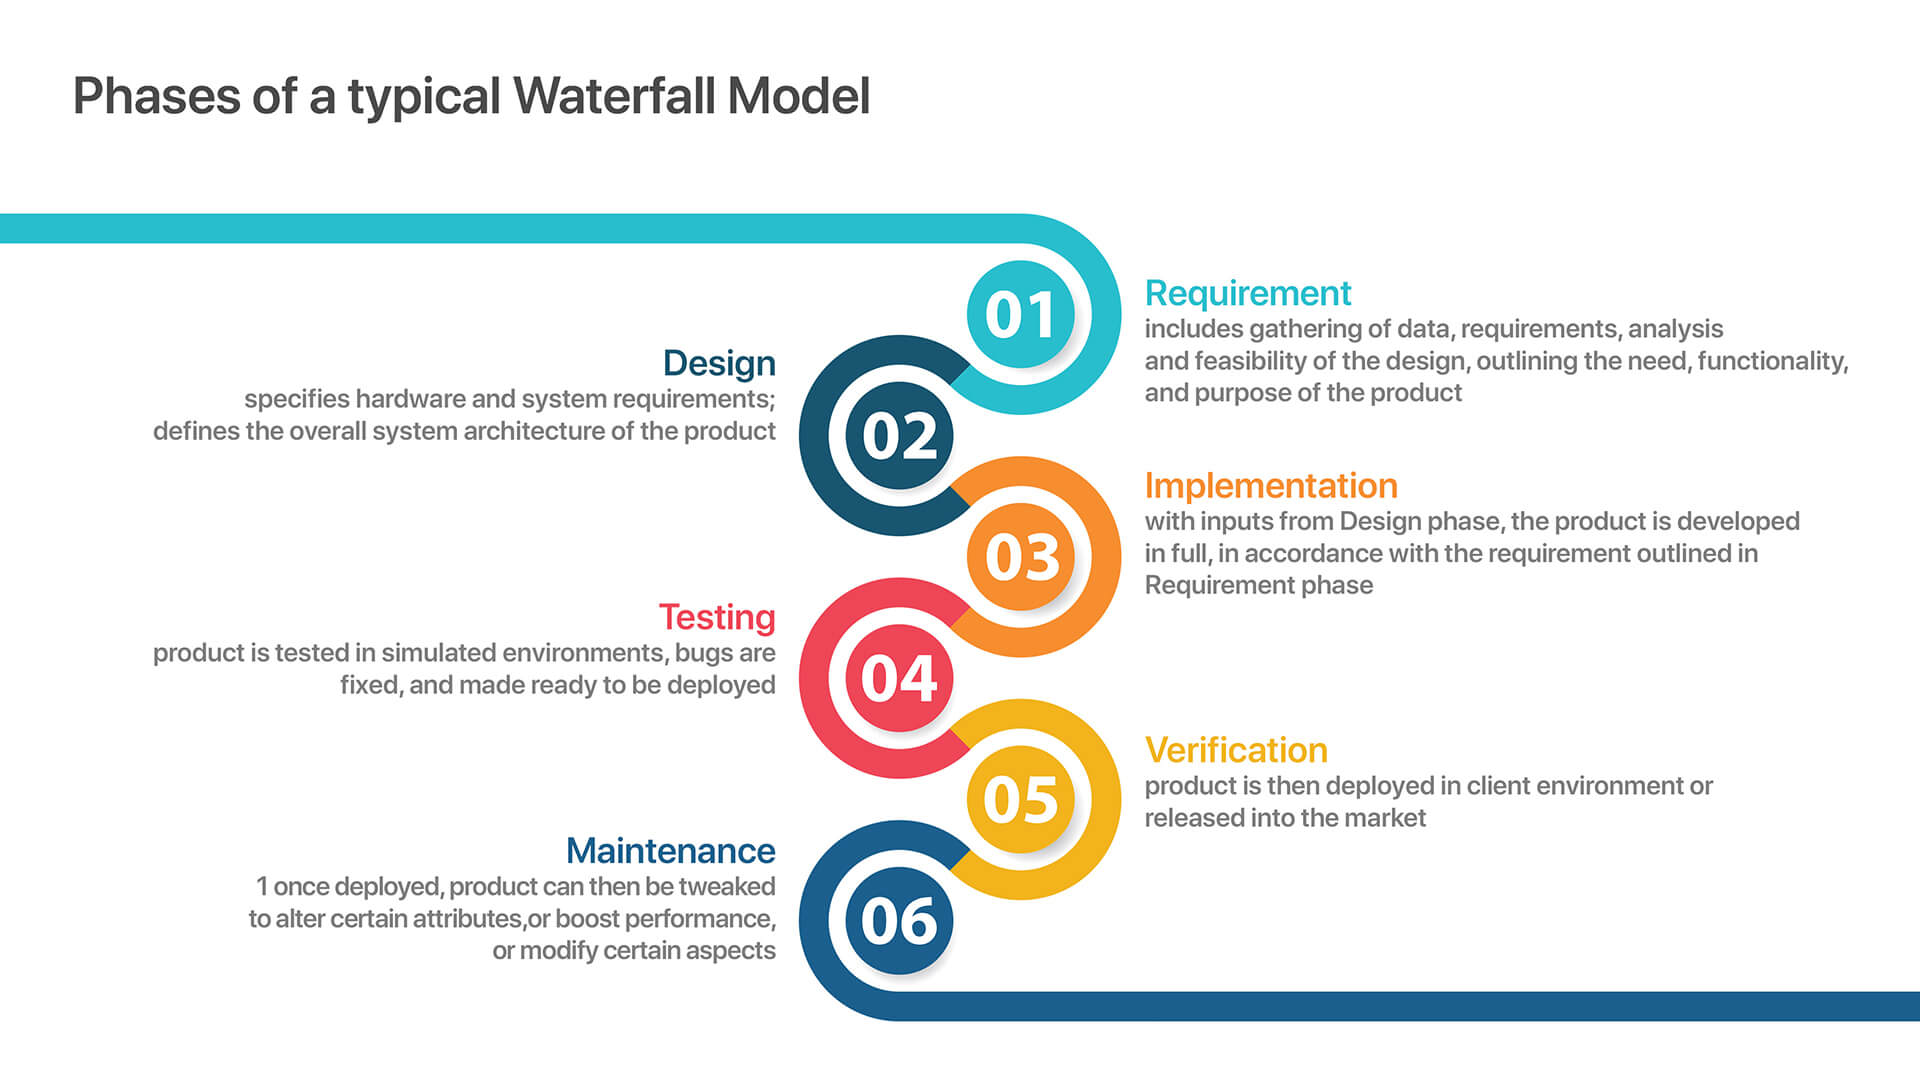 Phases of typical waterfall model